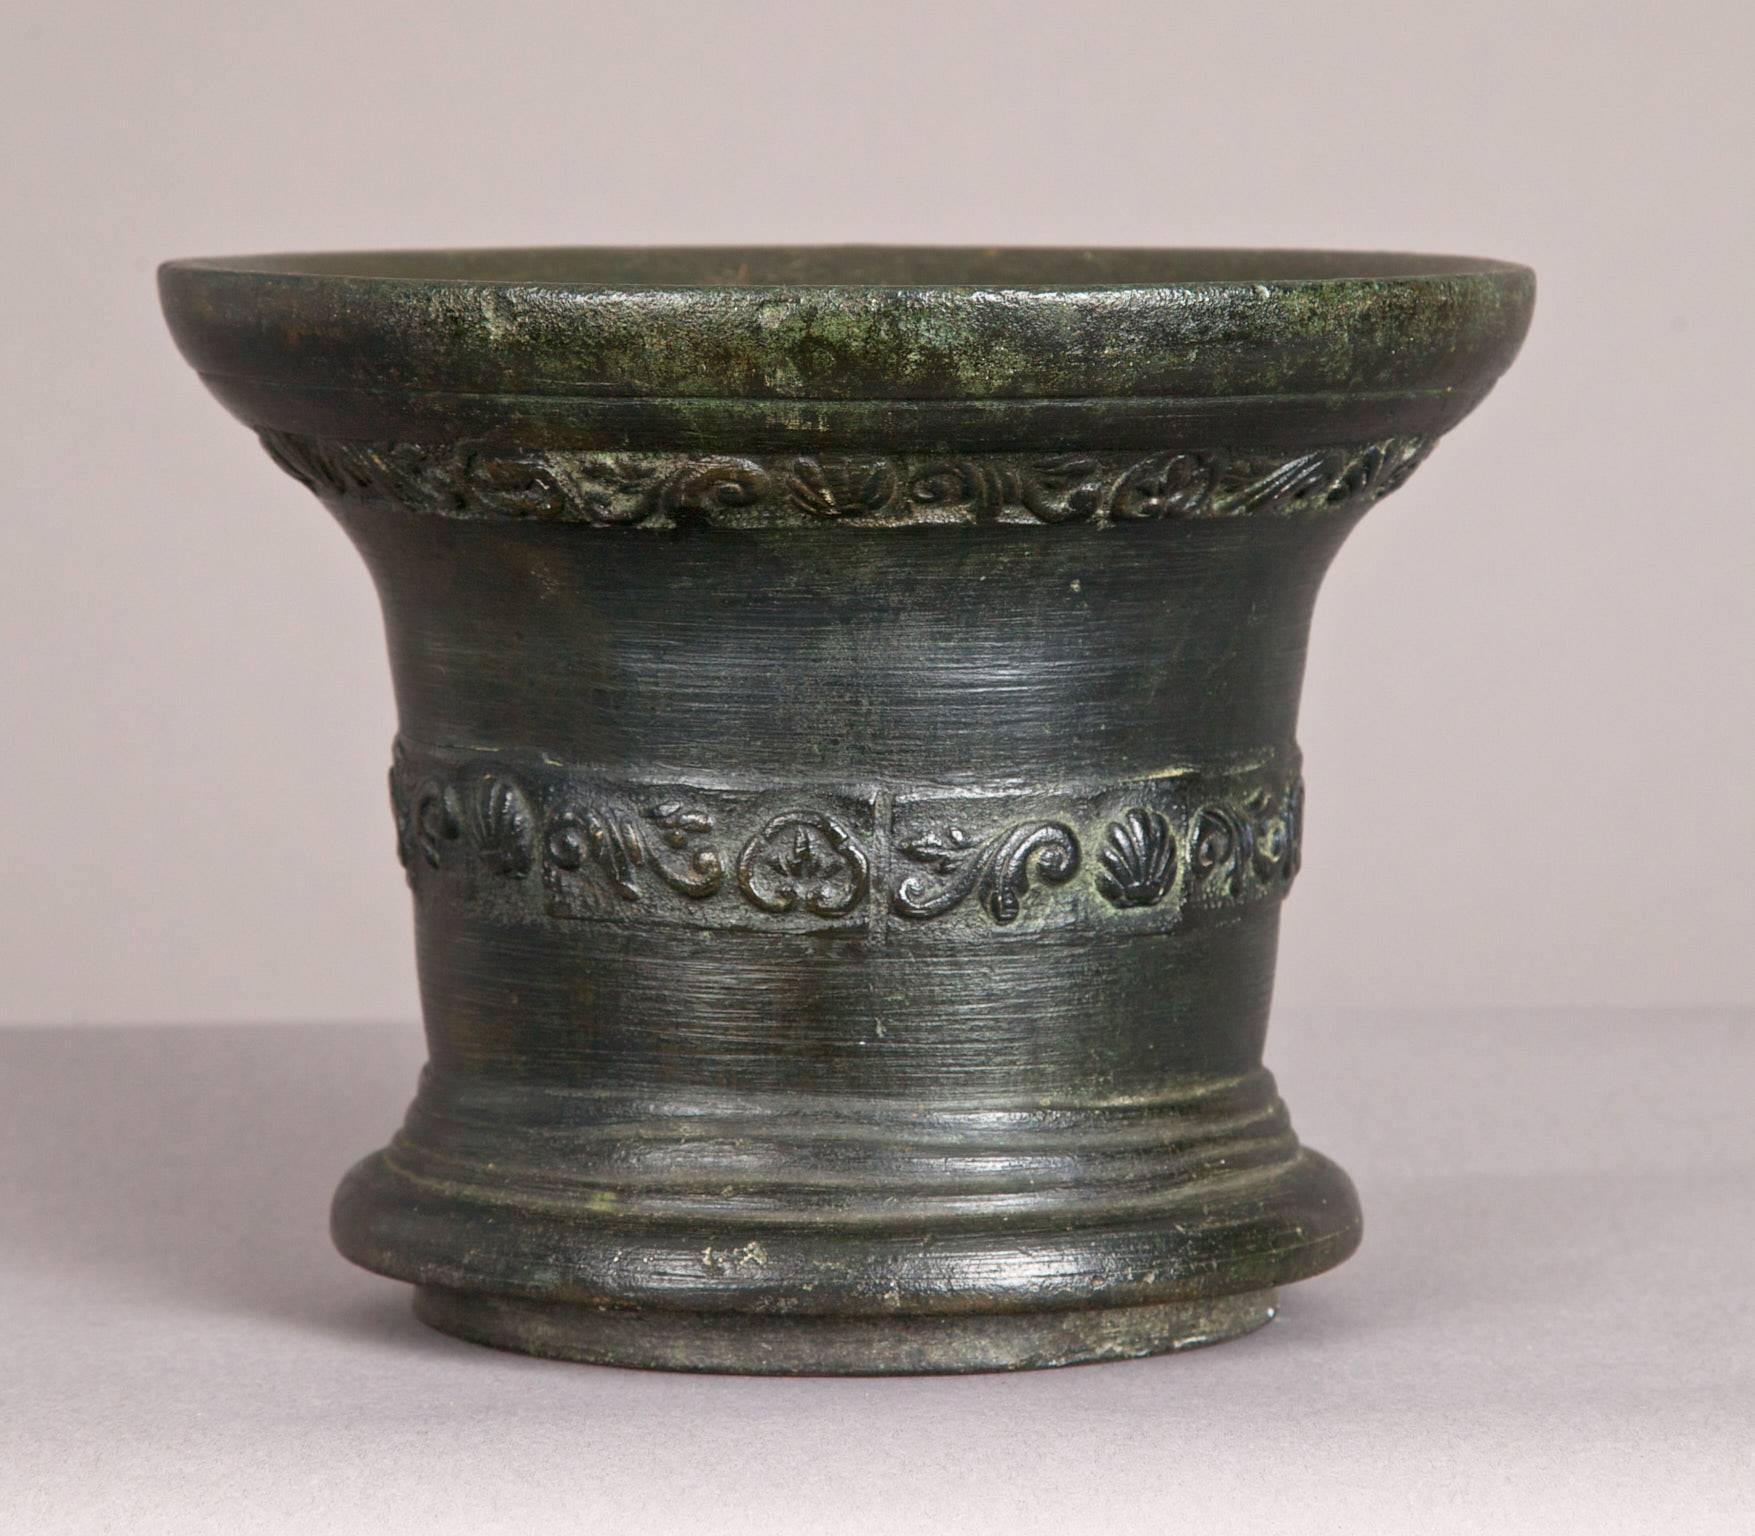 Mid-17th century lead bronze mortar. English, Whitechapel, City of London, circa 1630-1650

The deep rimmed mortar cast with a scrolling floral pattern under the lip, the body with a further band of interlace centred upon scallop shells. From a